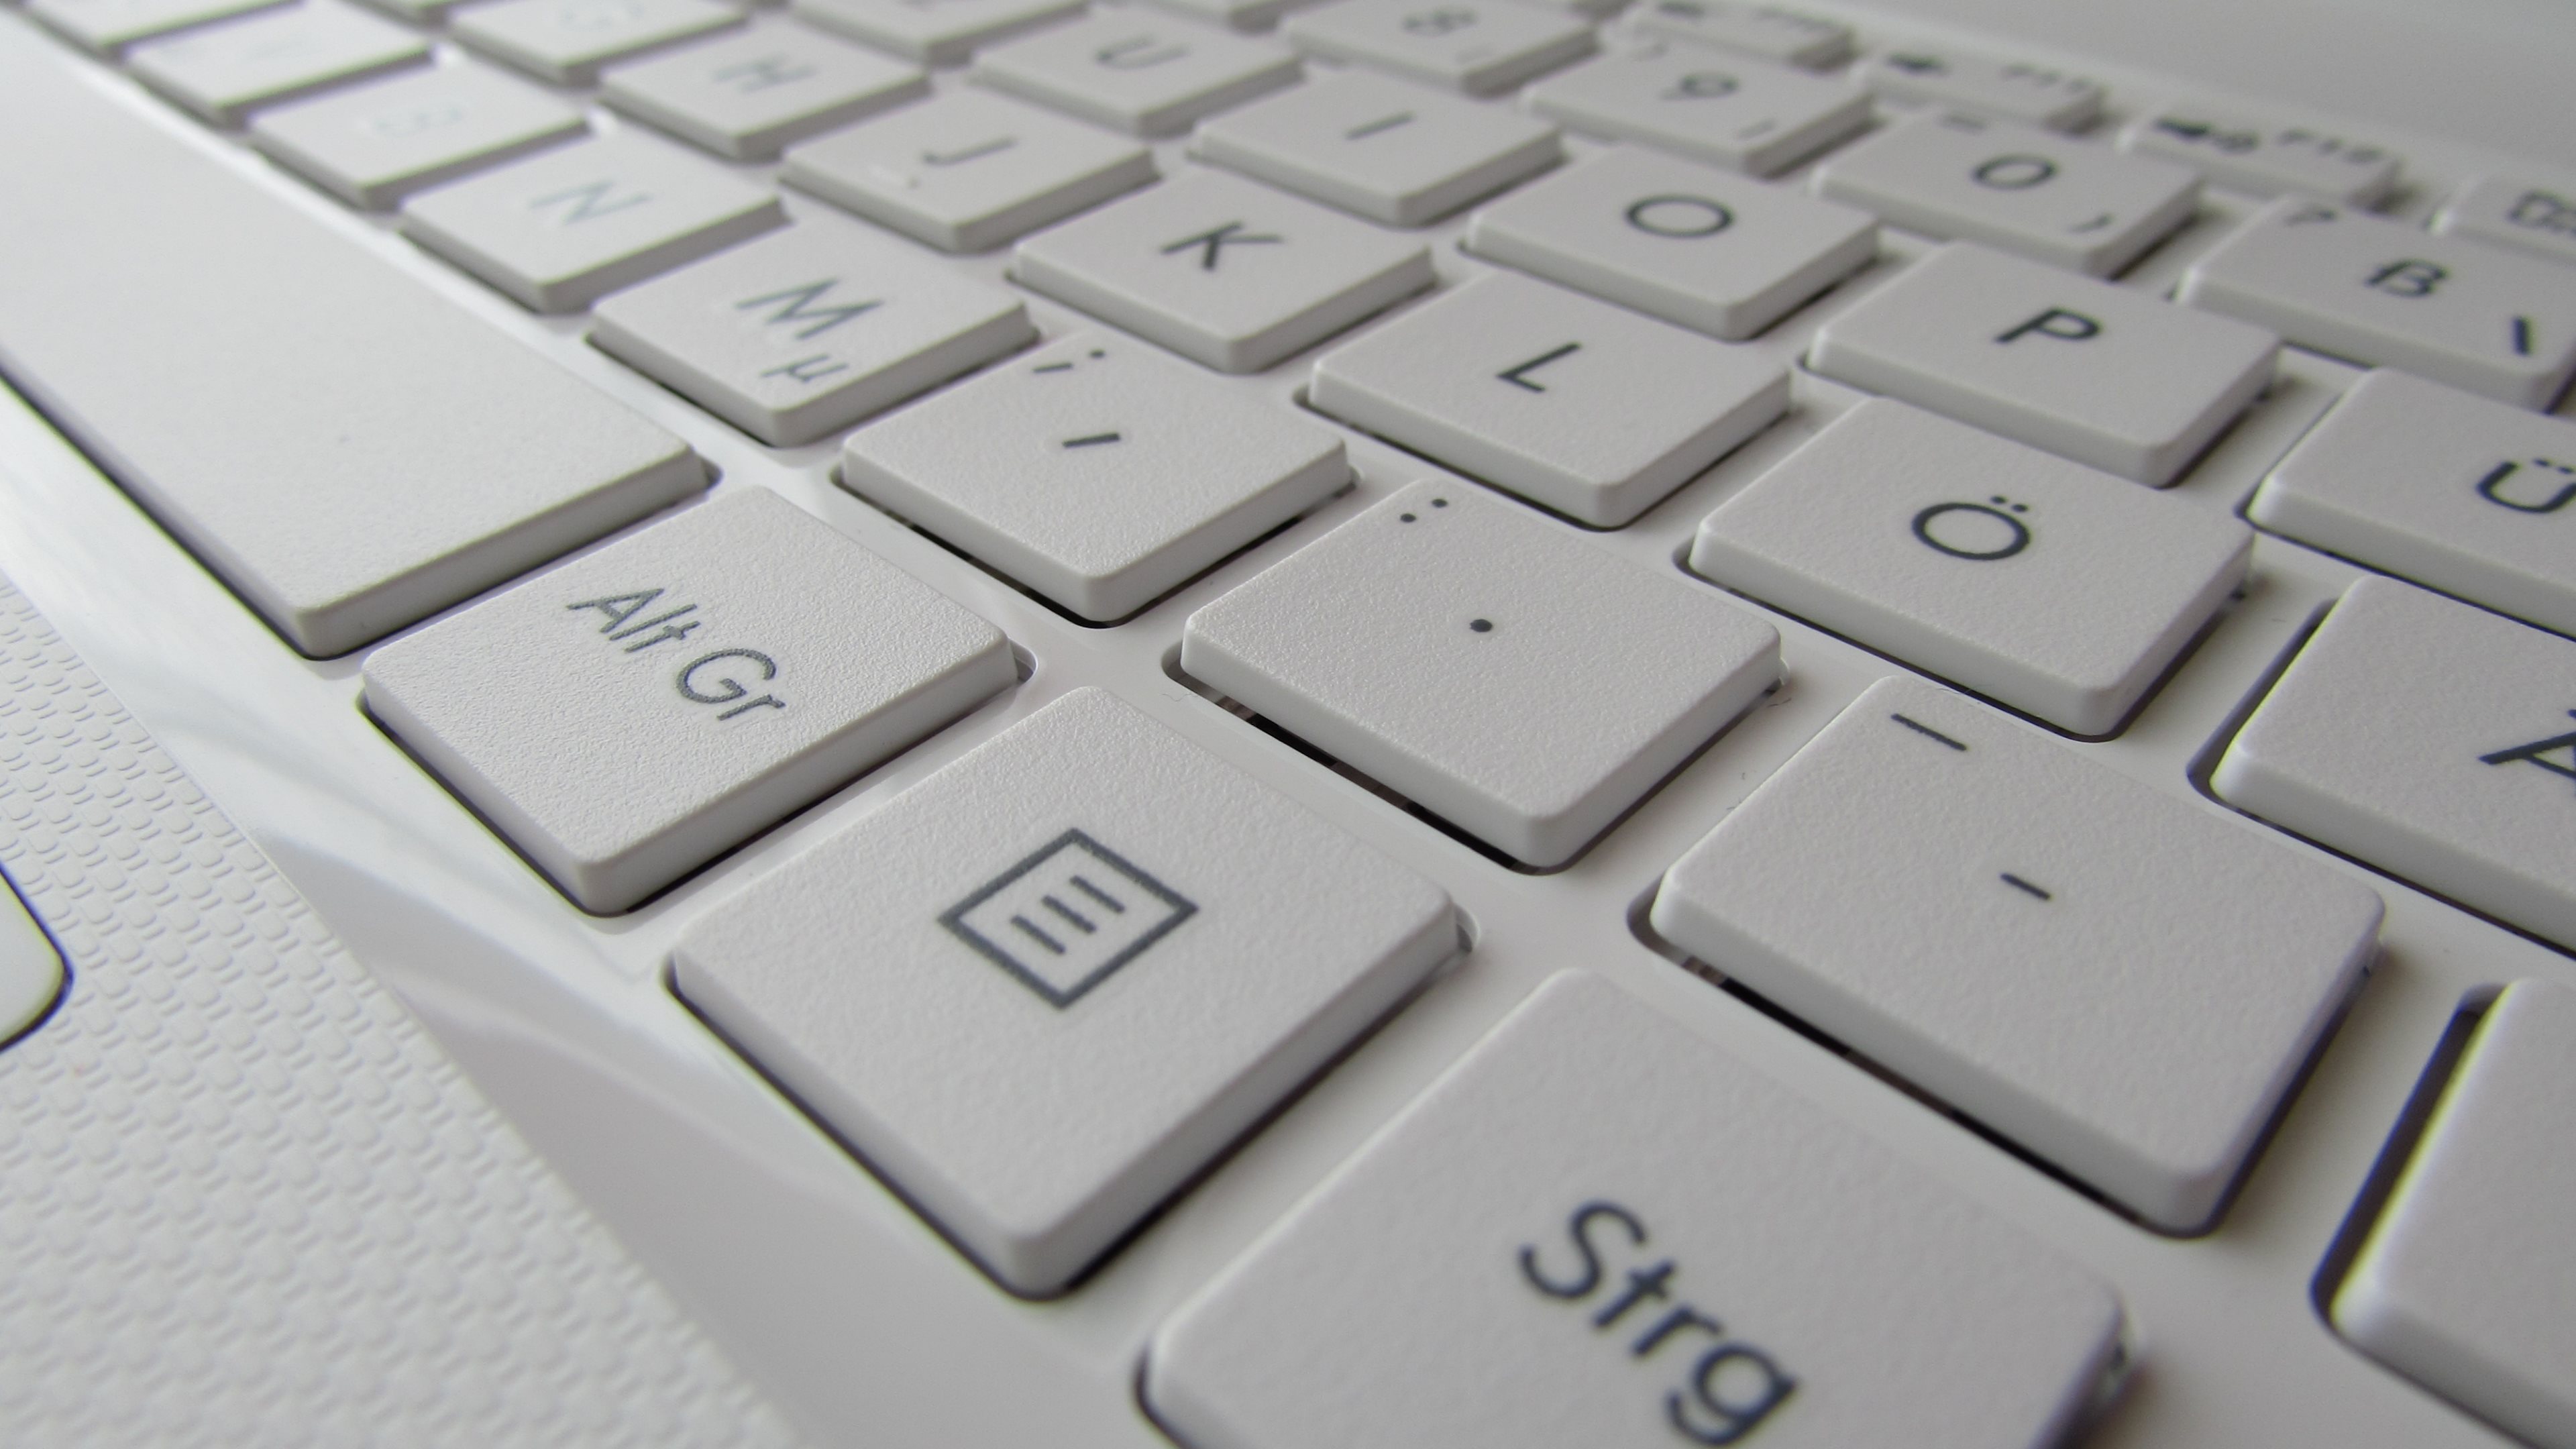 keyboard, technology images